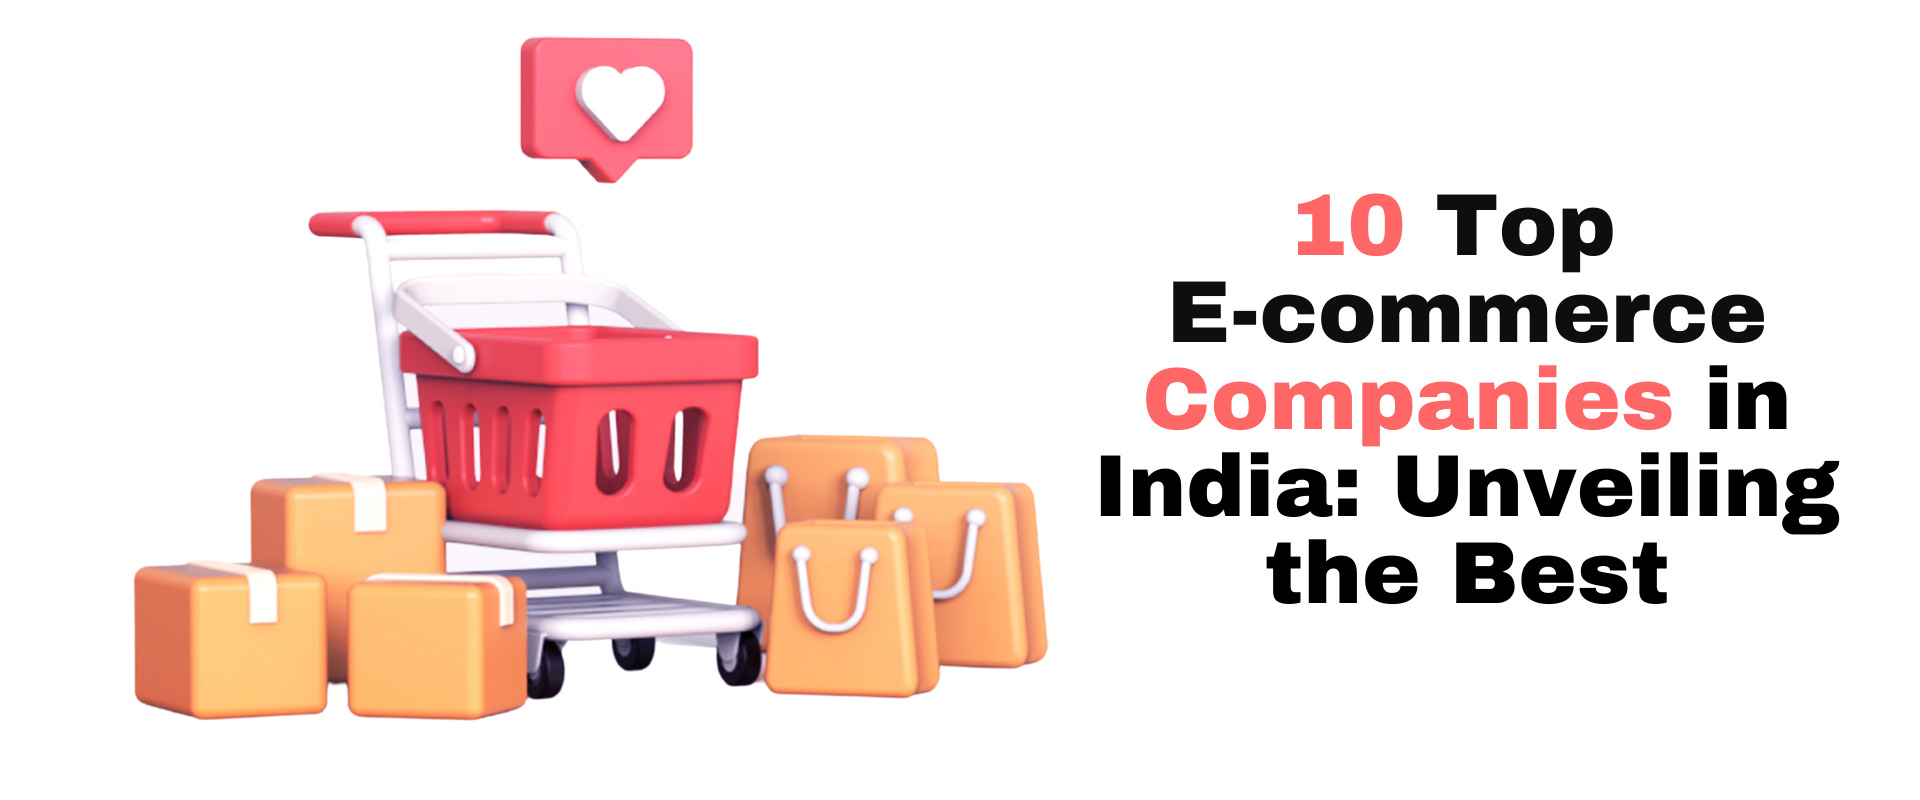 Top Ecommerce Companies in India